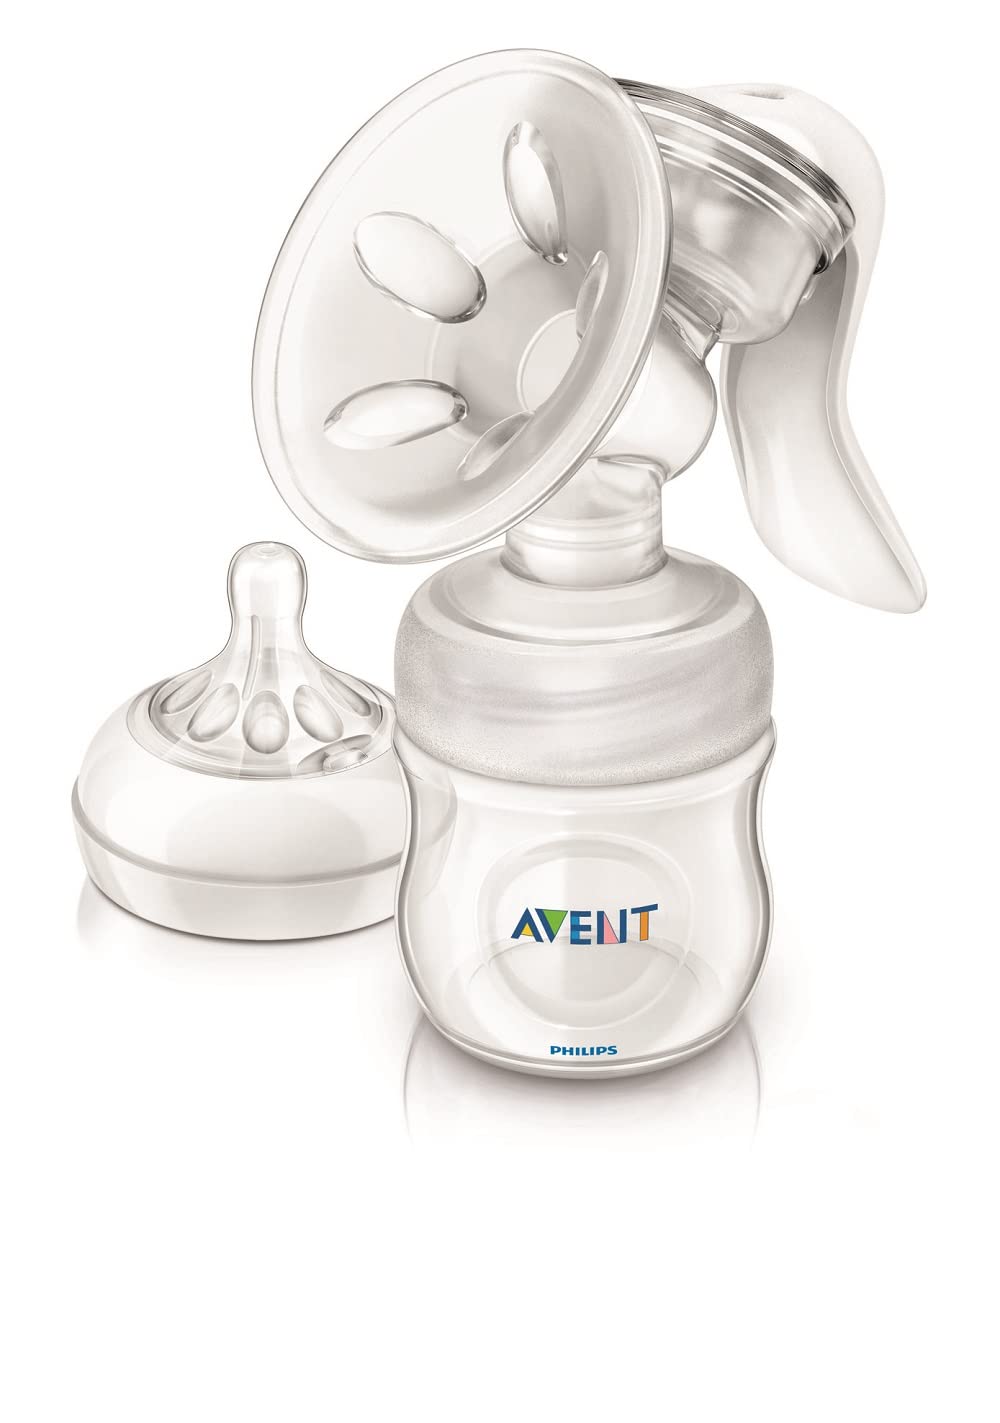 Philips Avent Manual Breast Pump in BD